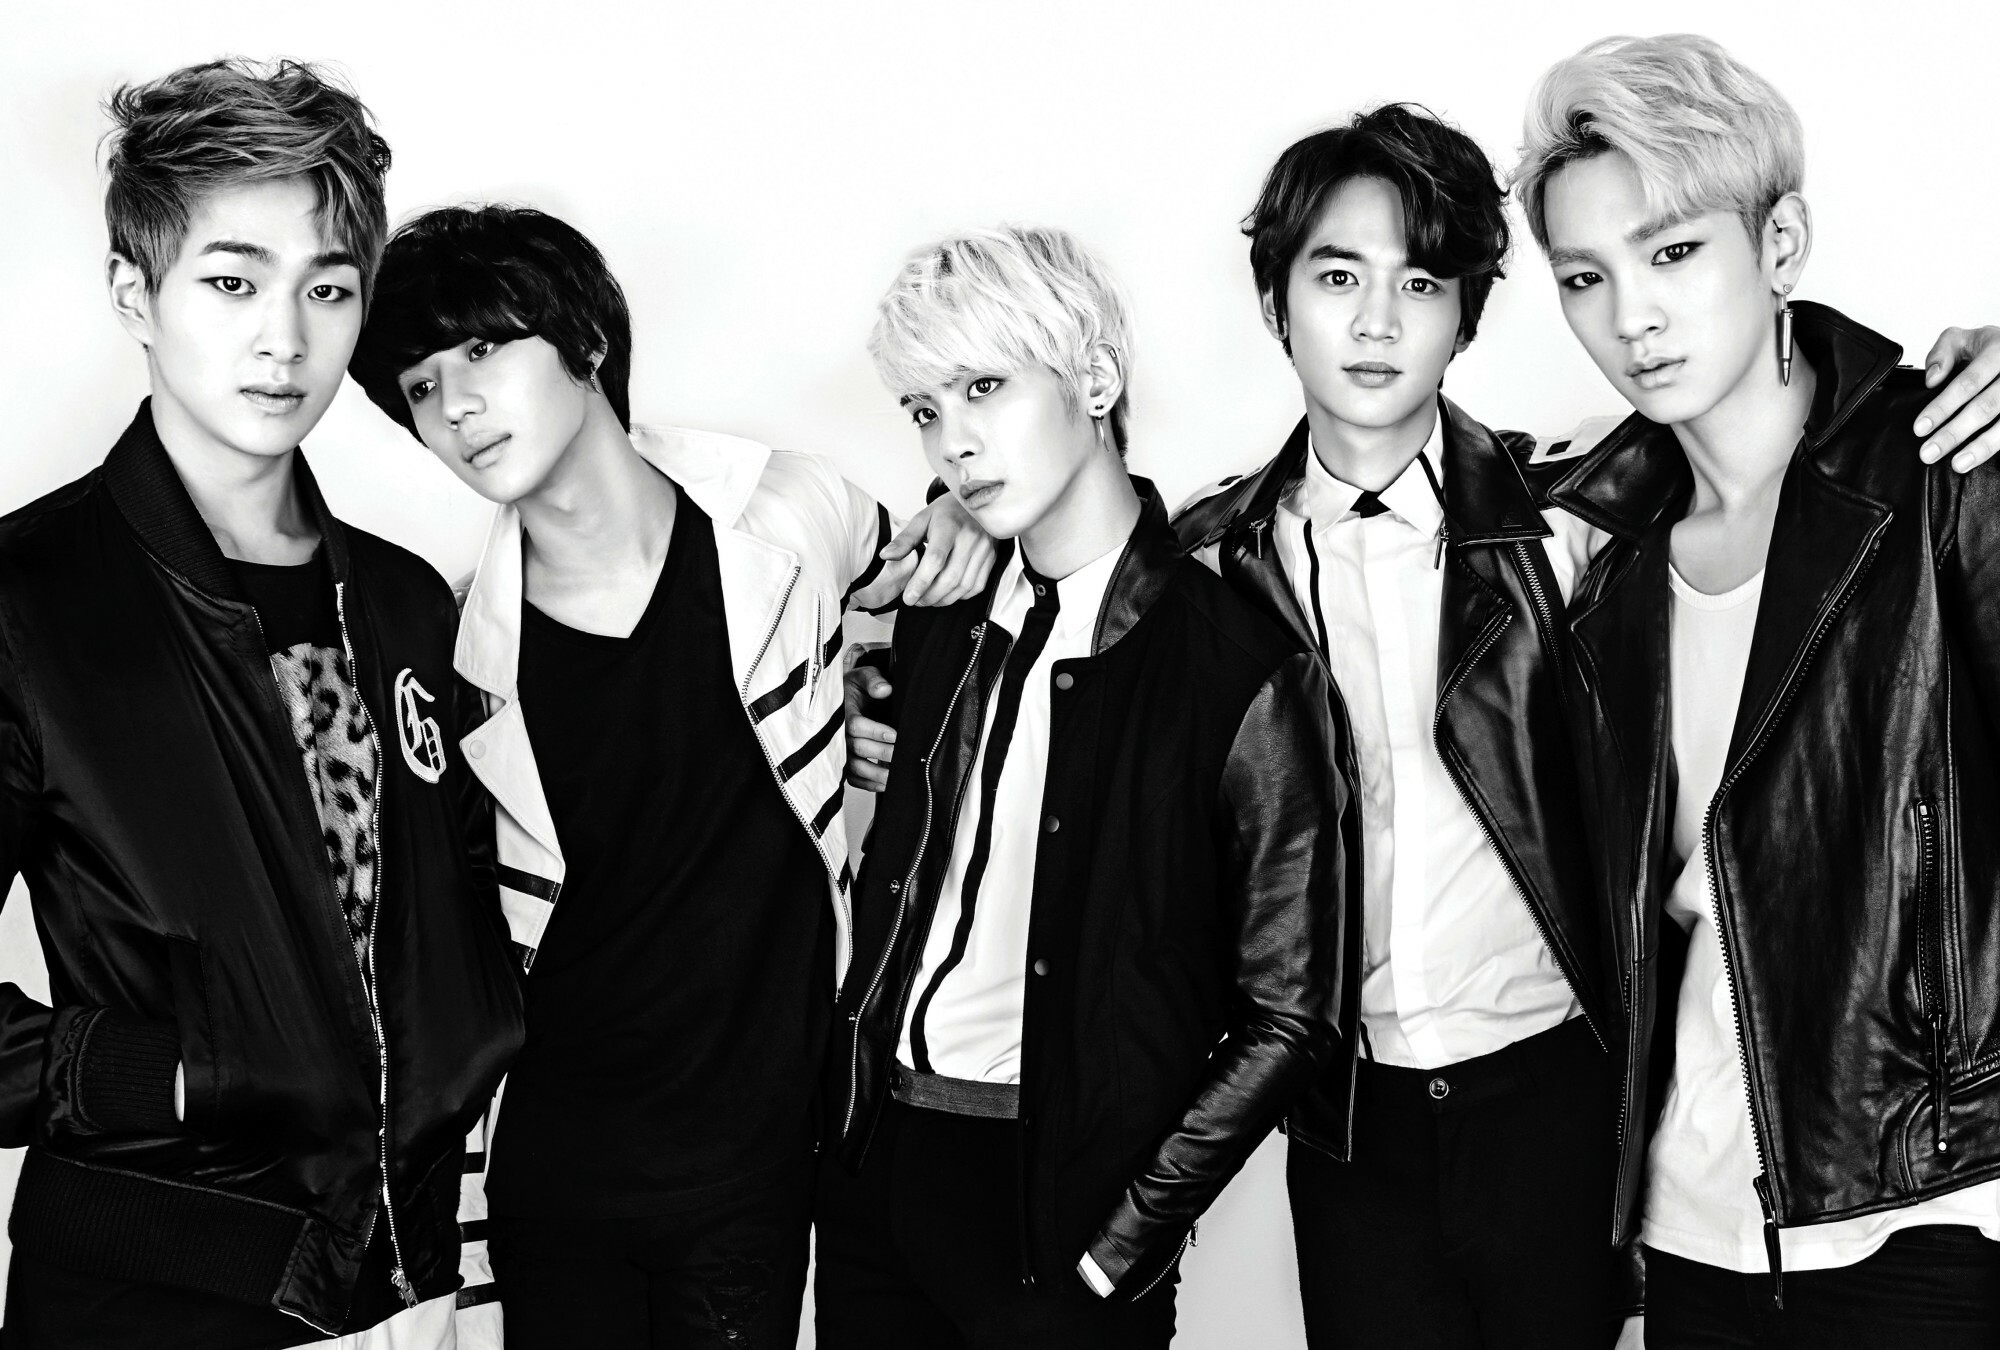 SHINee: The Japanese version of their single "Replay" sold over 100,000 copies. 2000x1350 HD Wallpaper.